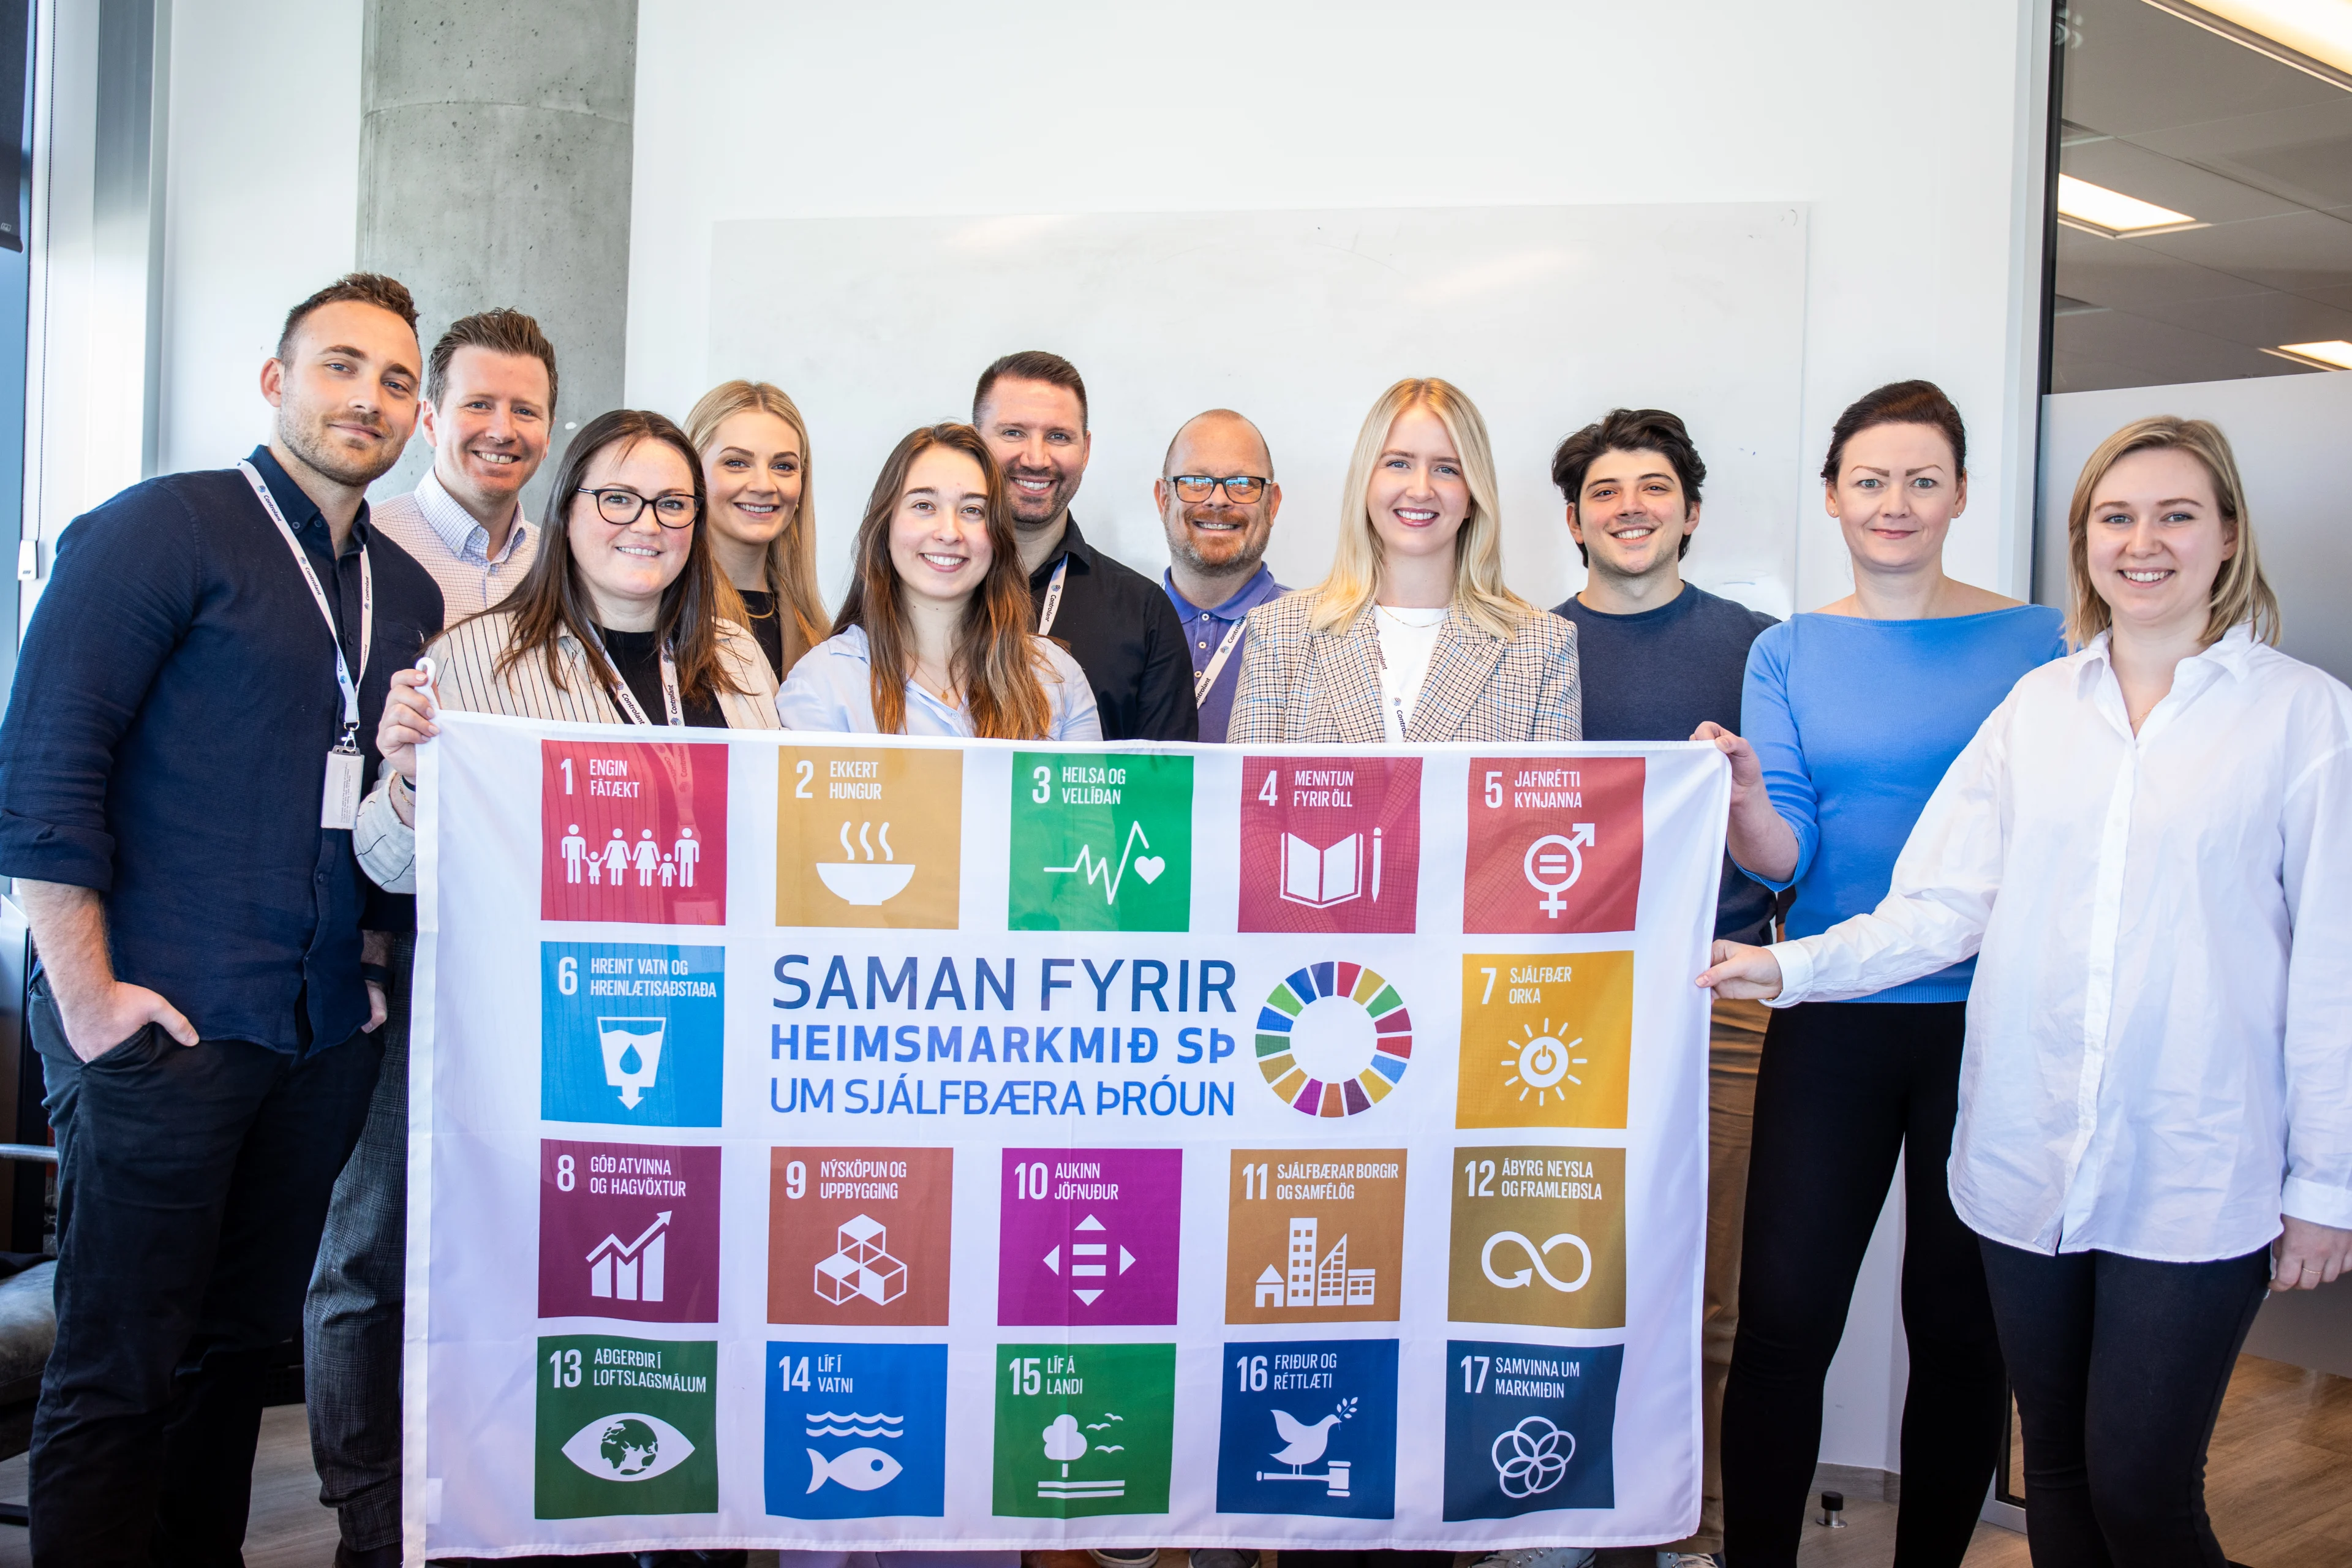 Controlant team working together towards the United Nations Sustainable Development Goals.